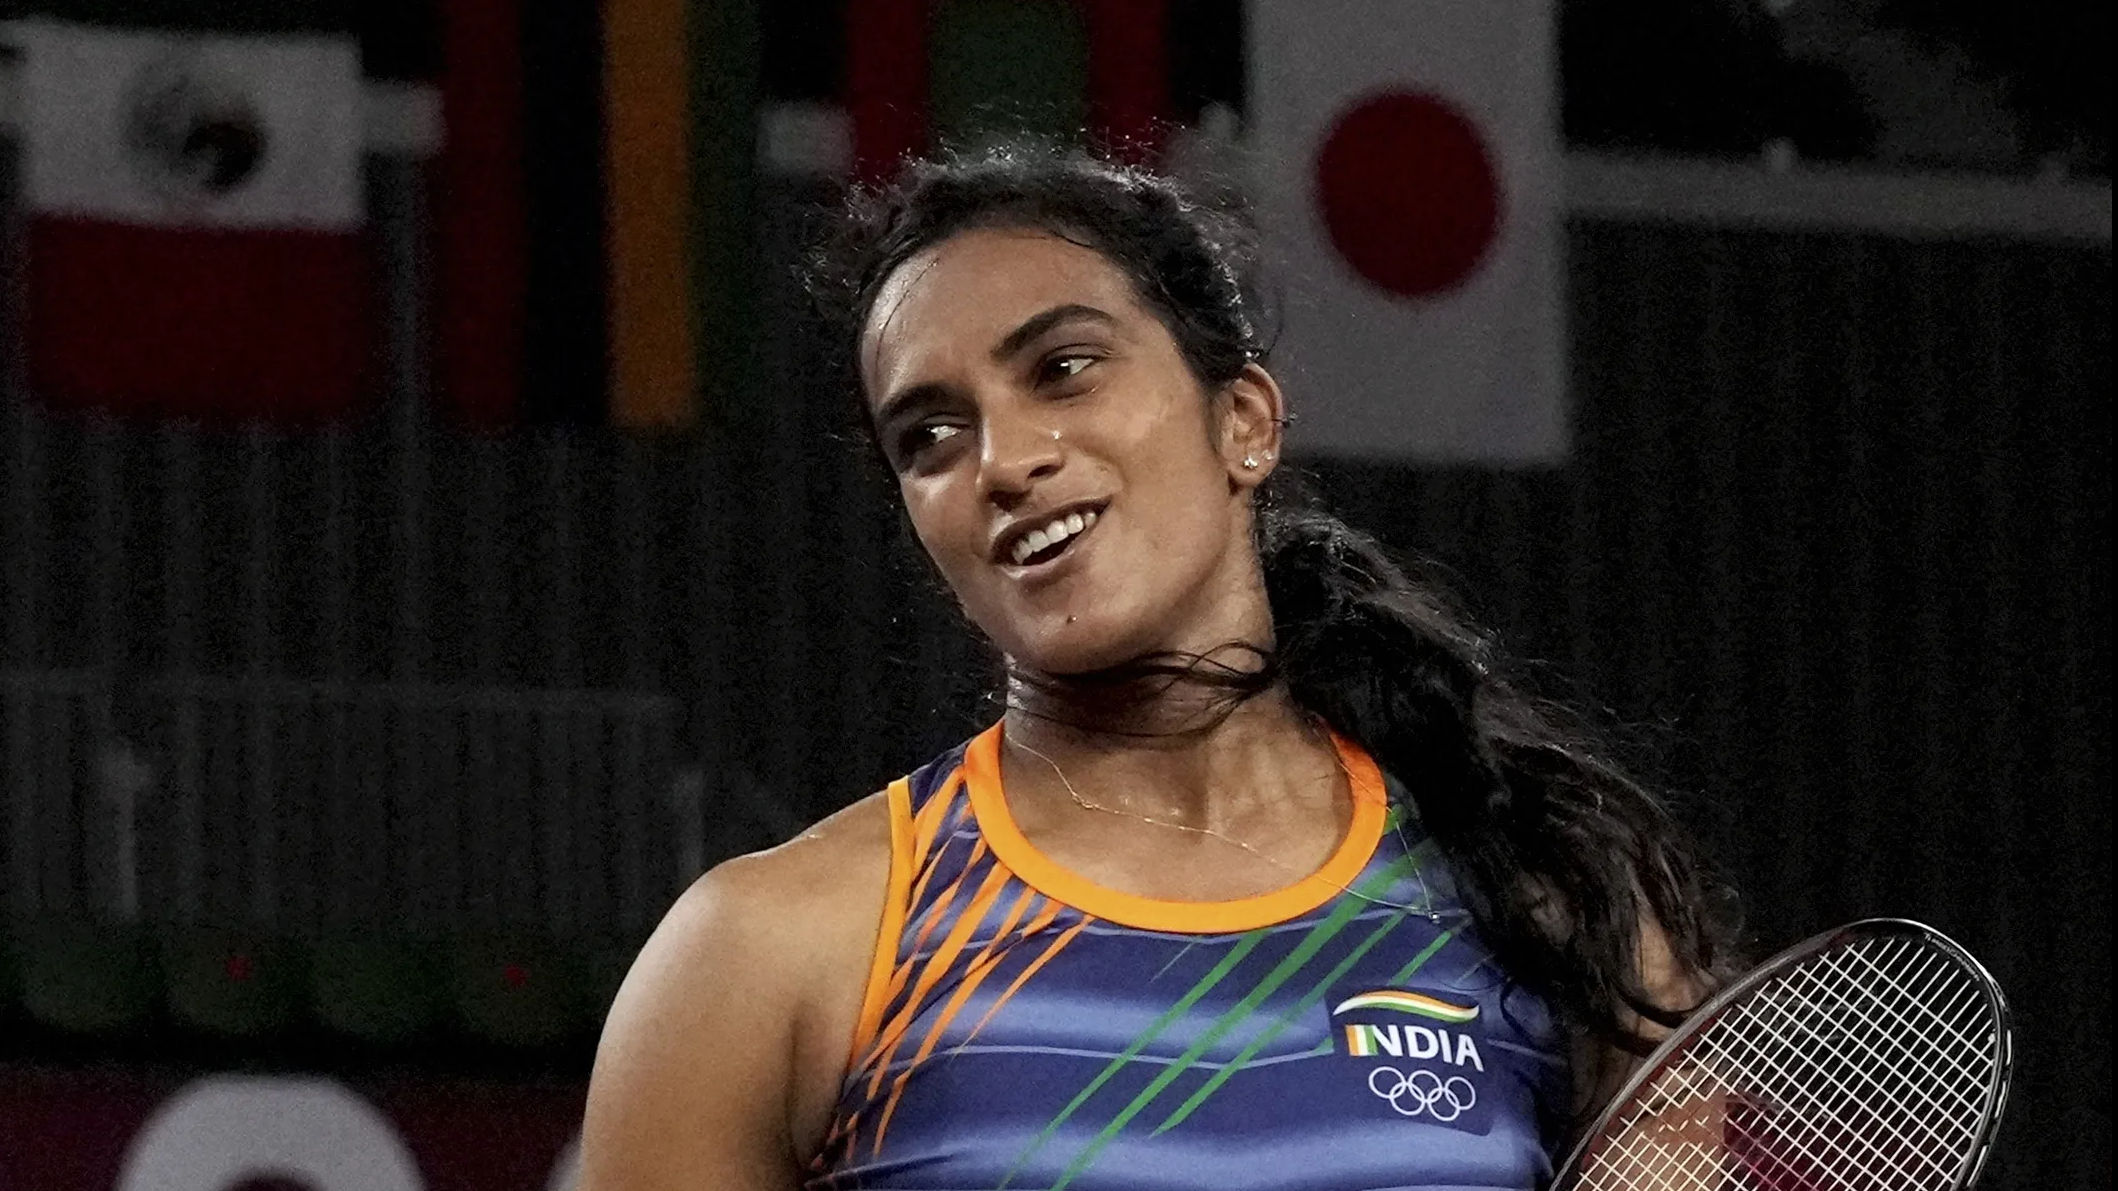 Shuttler PV Sindhu becomes first Indian woman to win two Olympic medals